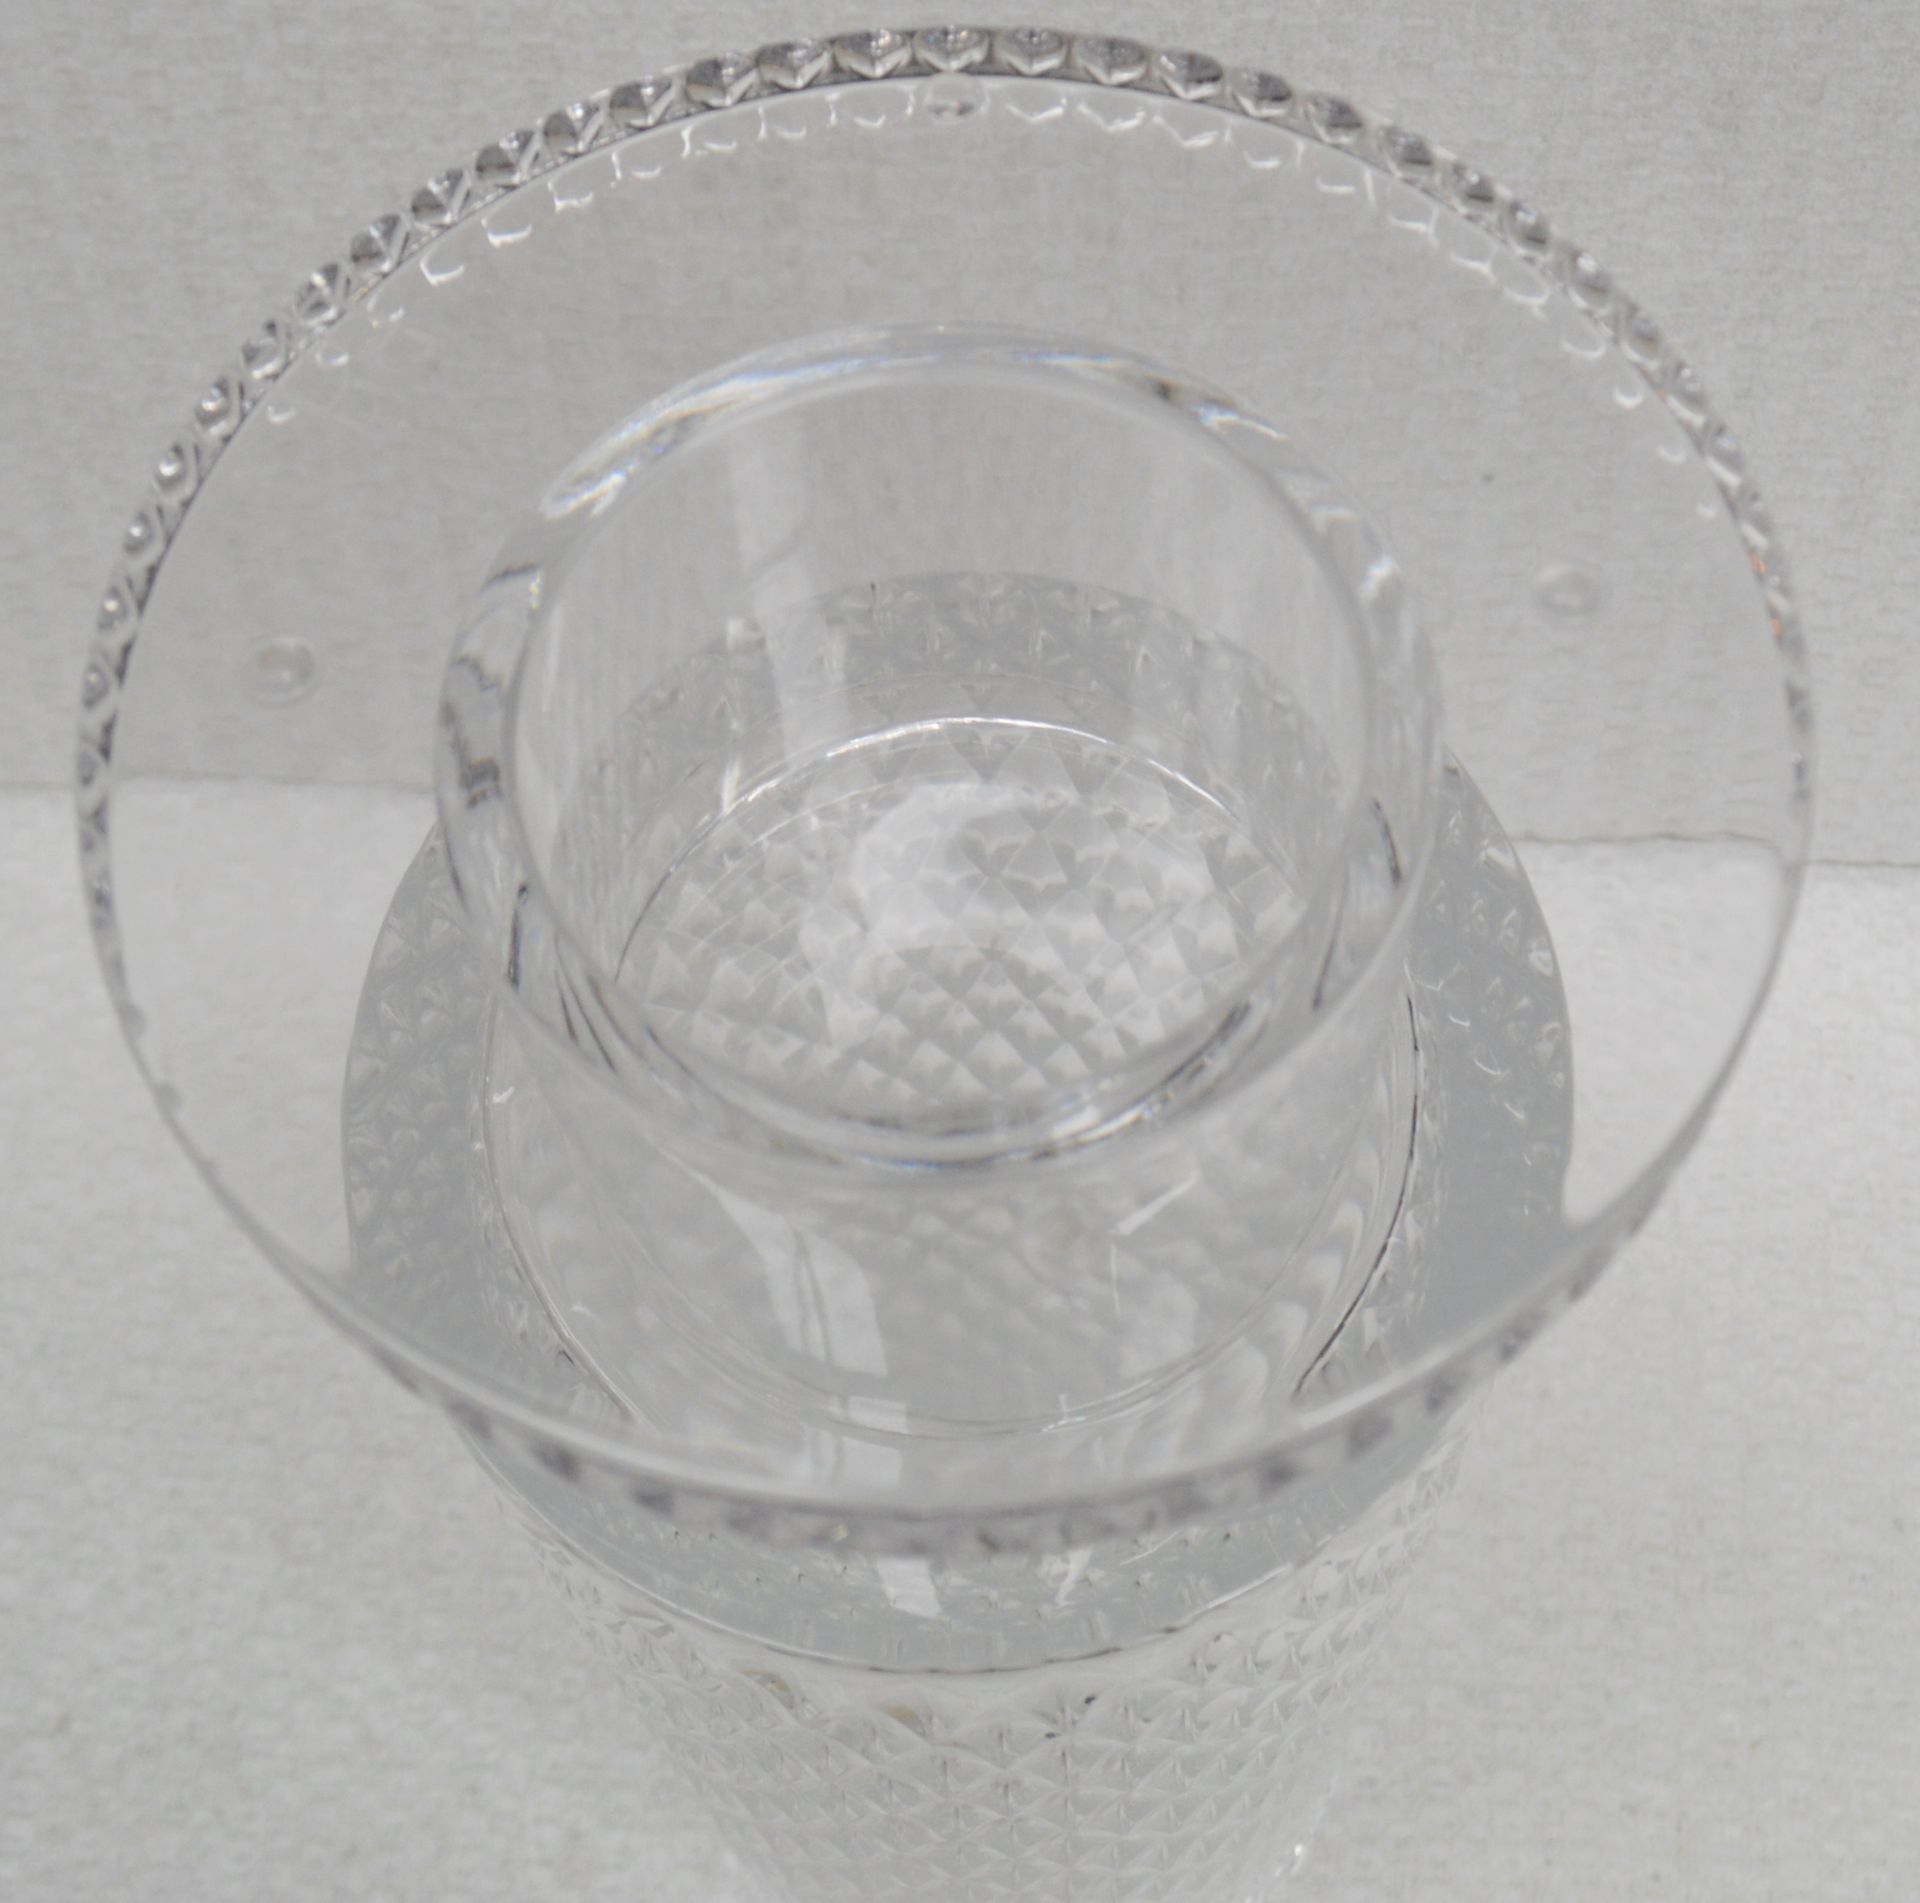 1 x BALDI 'Home Jewels' Italian Hand-crafted Artisan Clear Crystal Vase - Unboxed Ex-display Item - Image 4 of 5